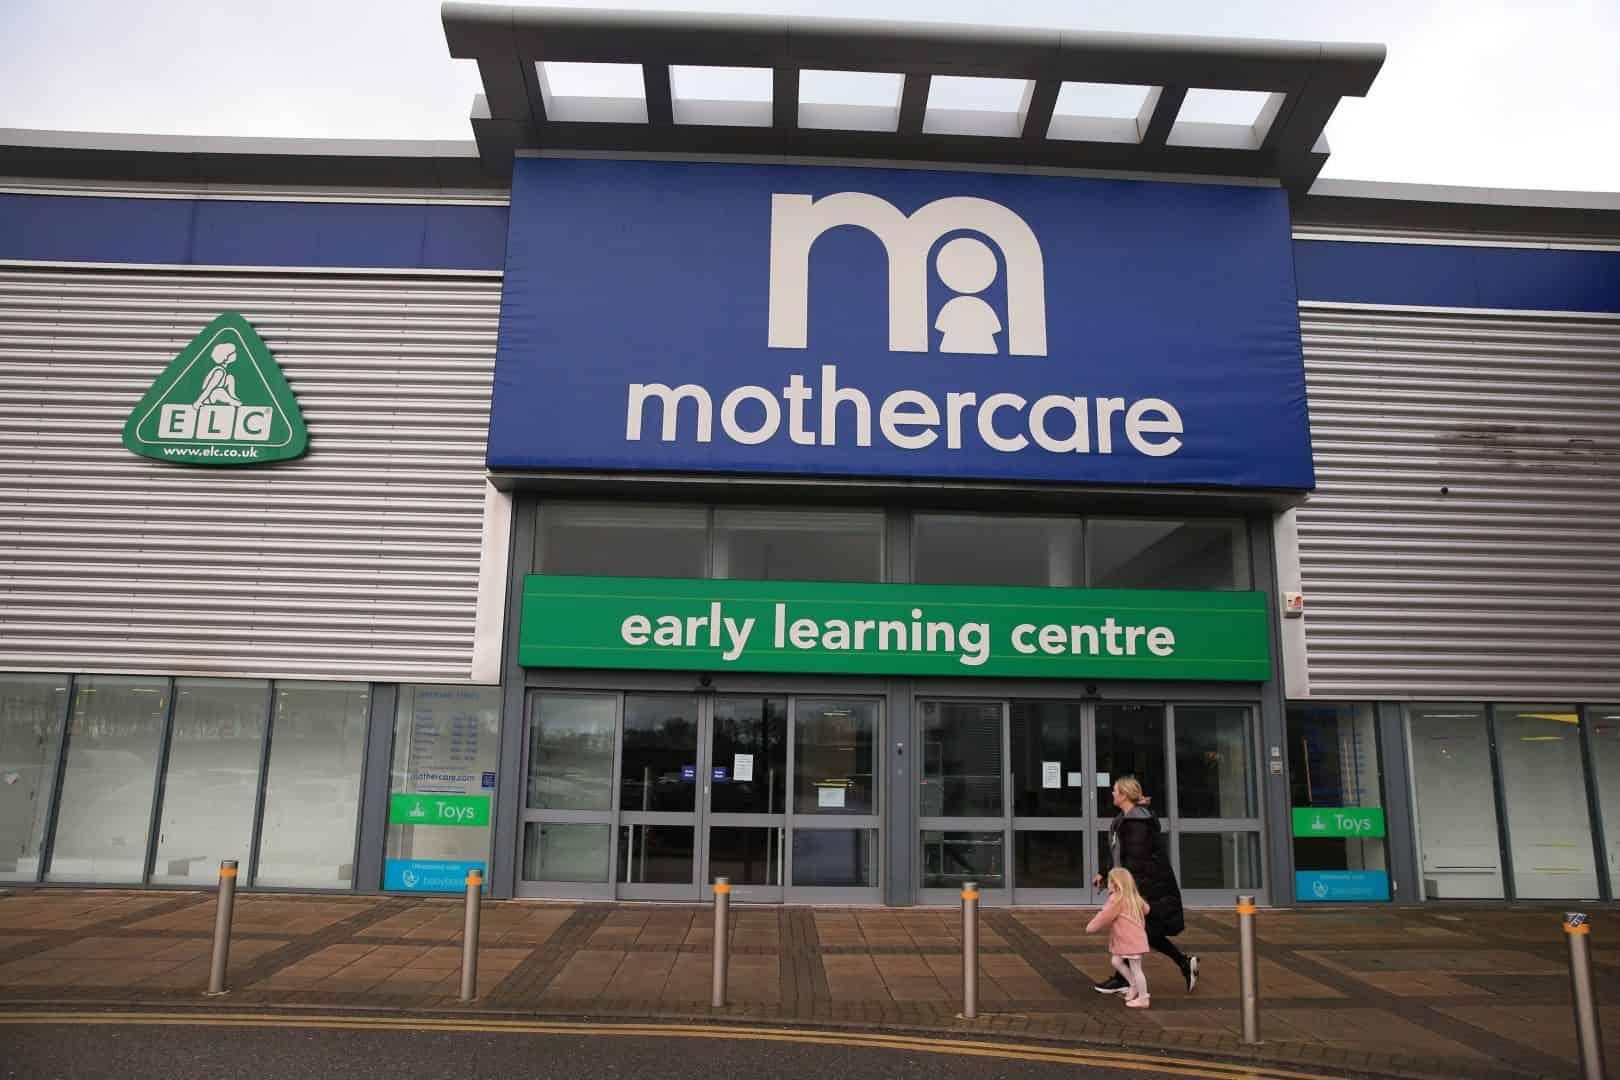 Mothercare disappears from the high street after 59 years